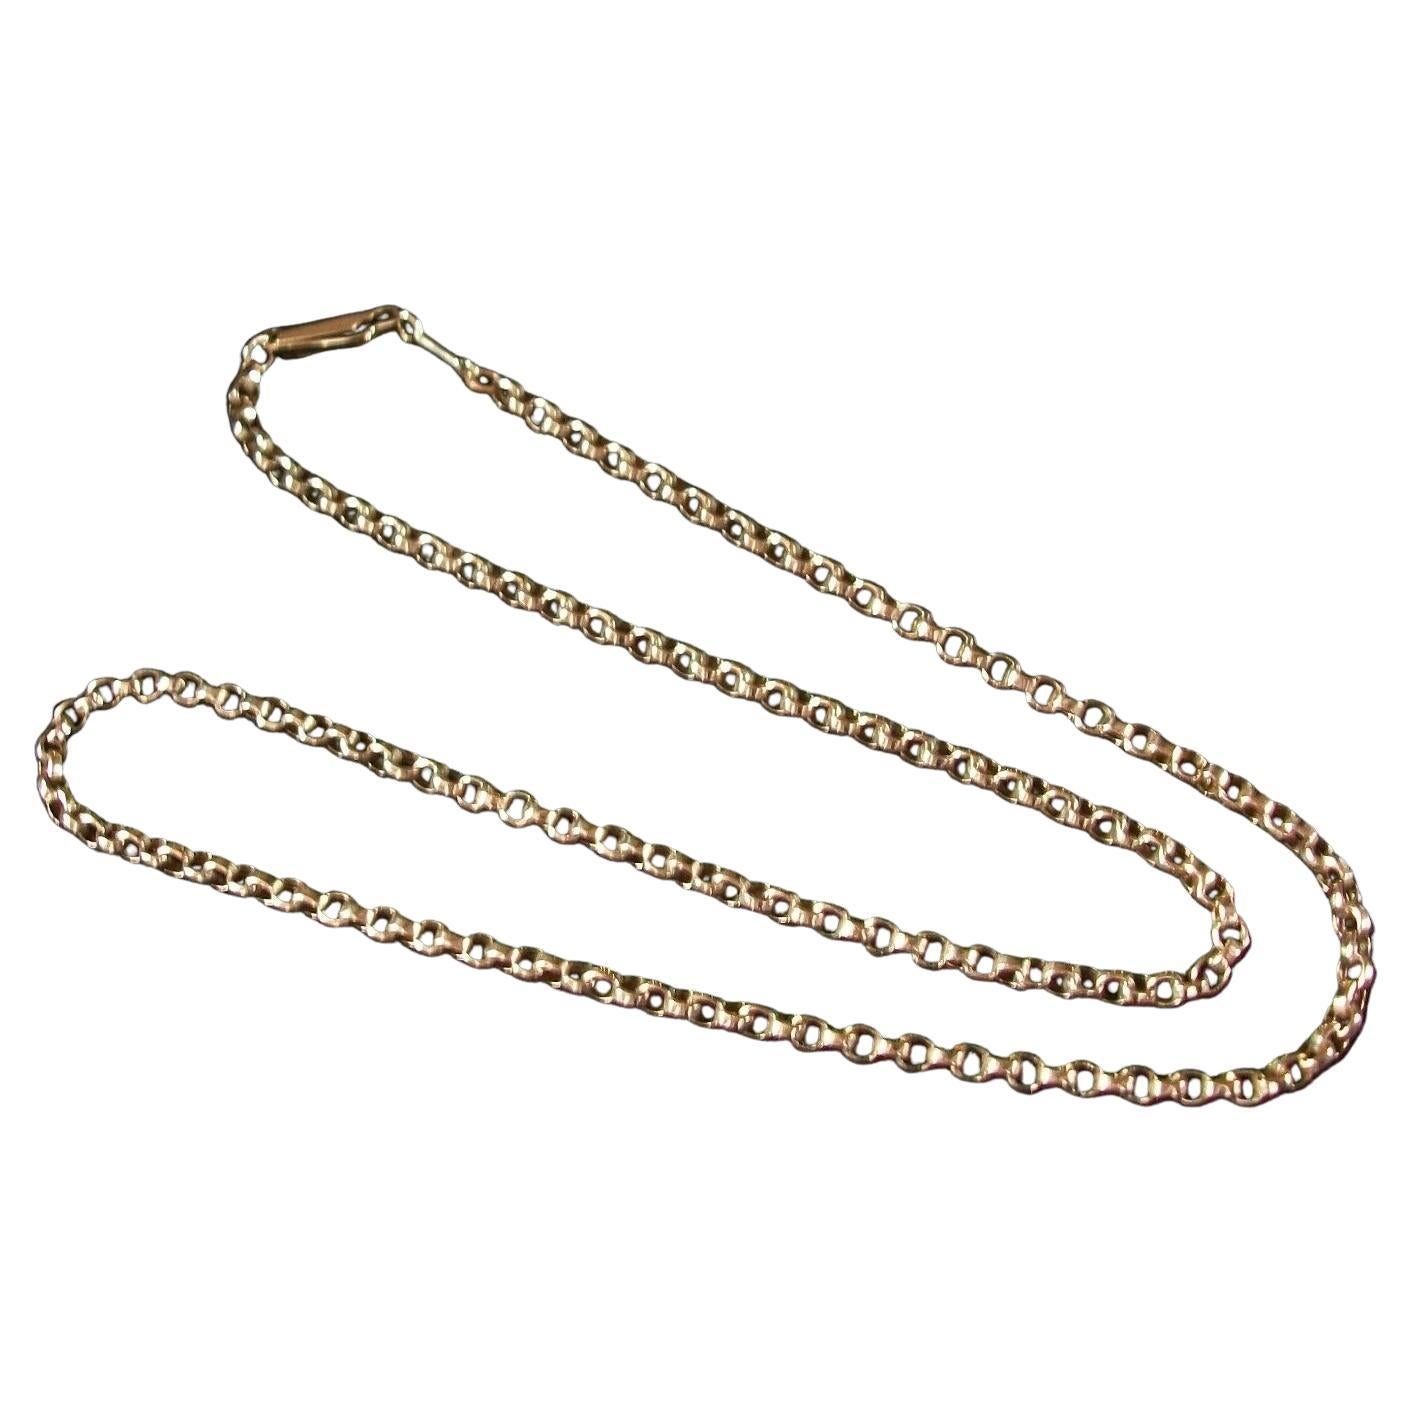 Small Belcher Chain with Dog Clip Clasp